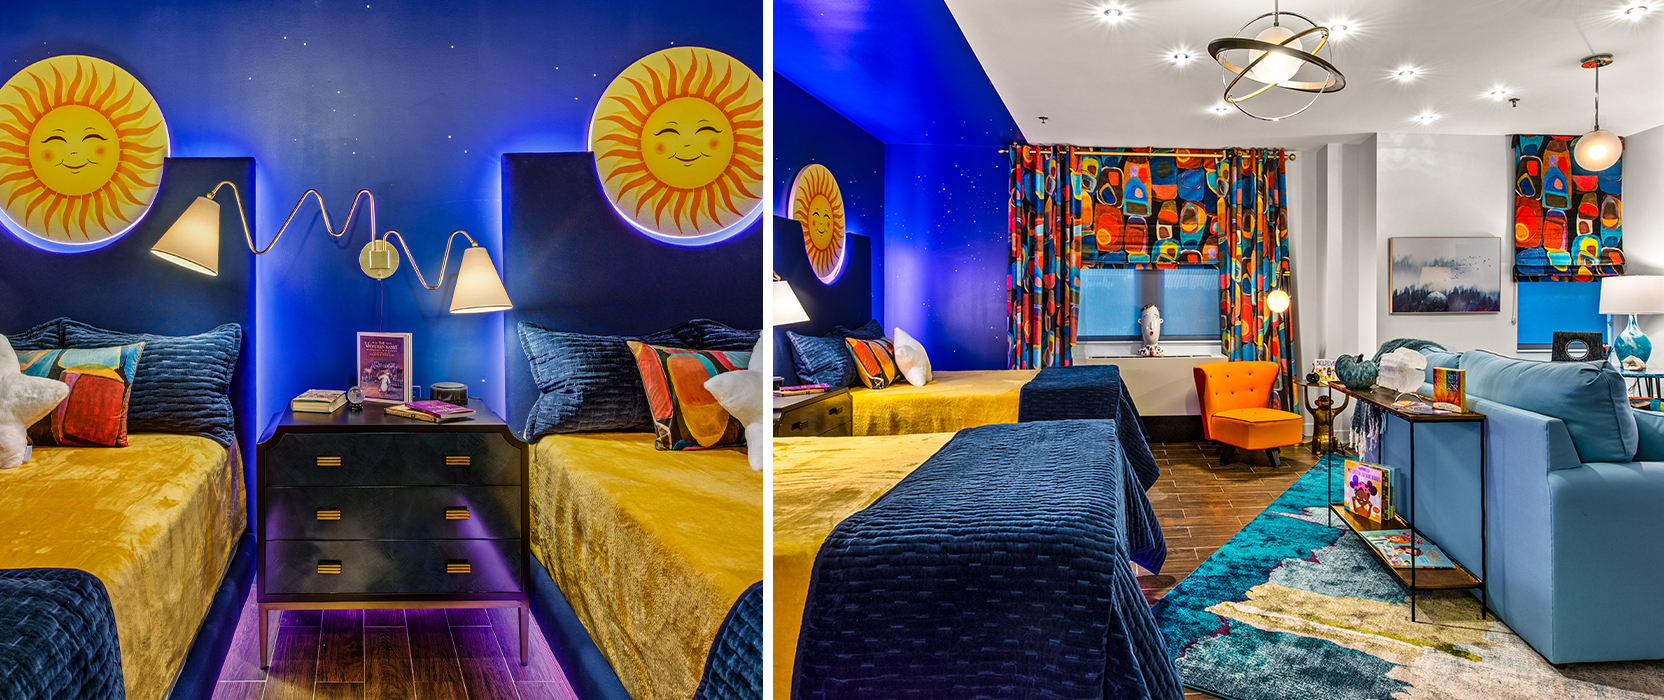 Guestroom in Ronald McDonald House with dark blue walls, funky furnishings, bold patterned curtains and celestial accents like large smiling sun faces above the headboards and star-shaped throw pillows.